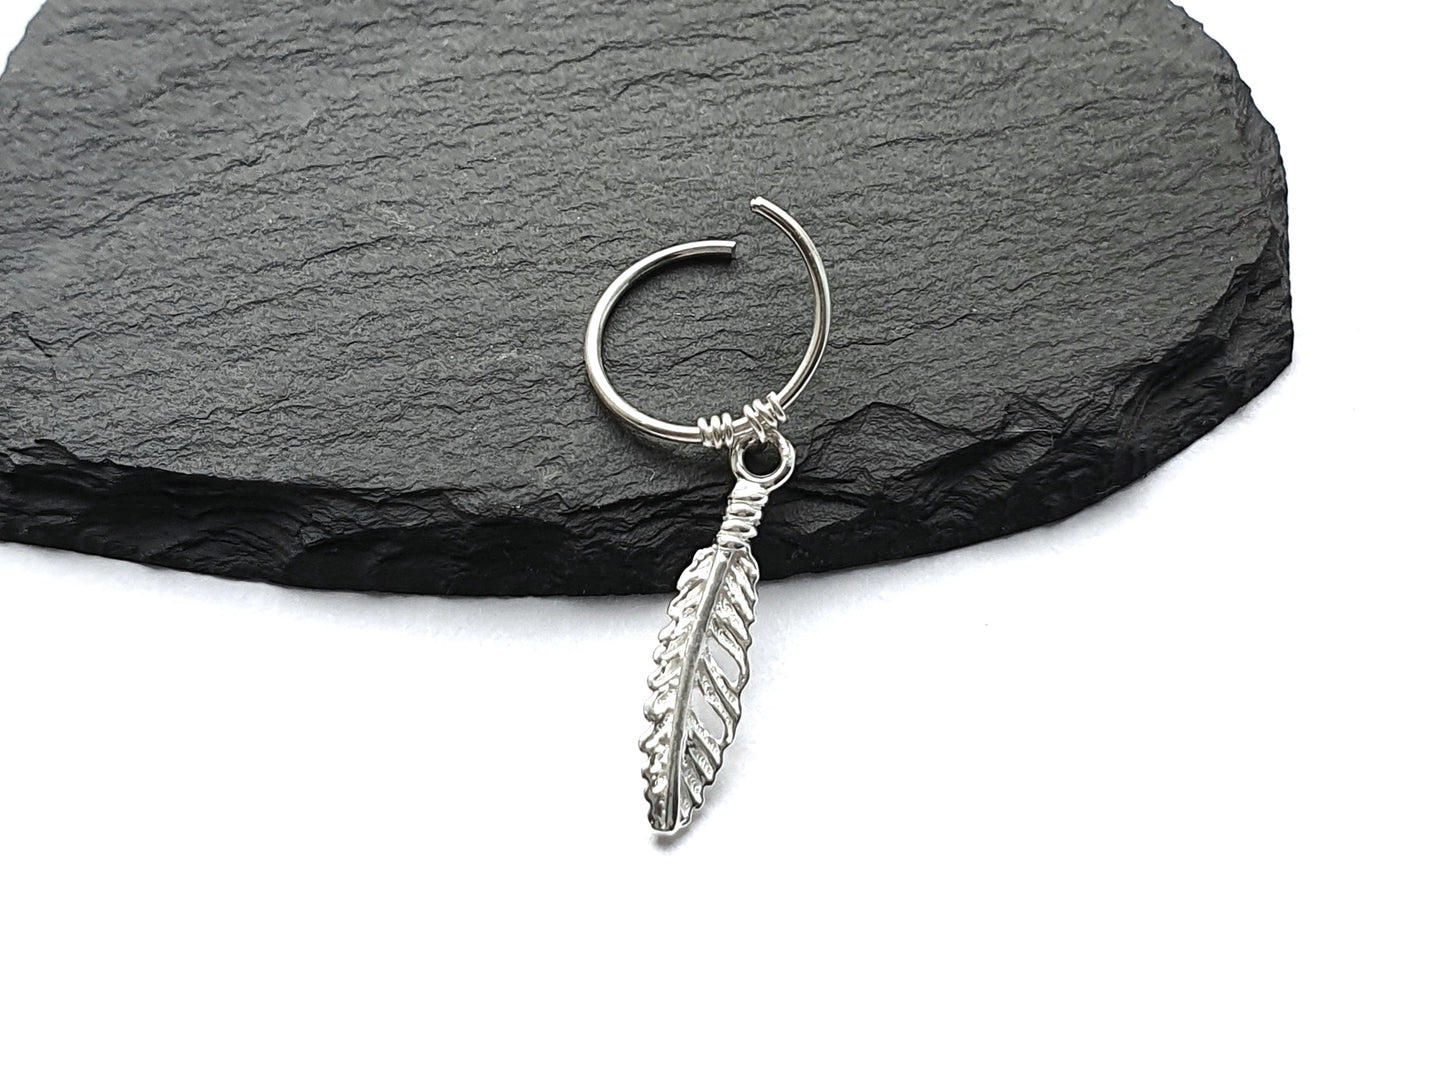 Boho Feather Helix Cartilage Hoop Earring Sterling Silver 20g 18g